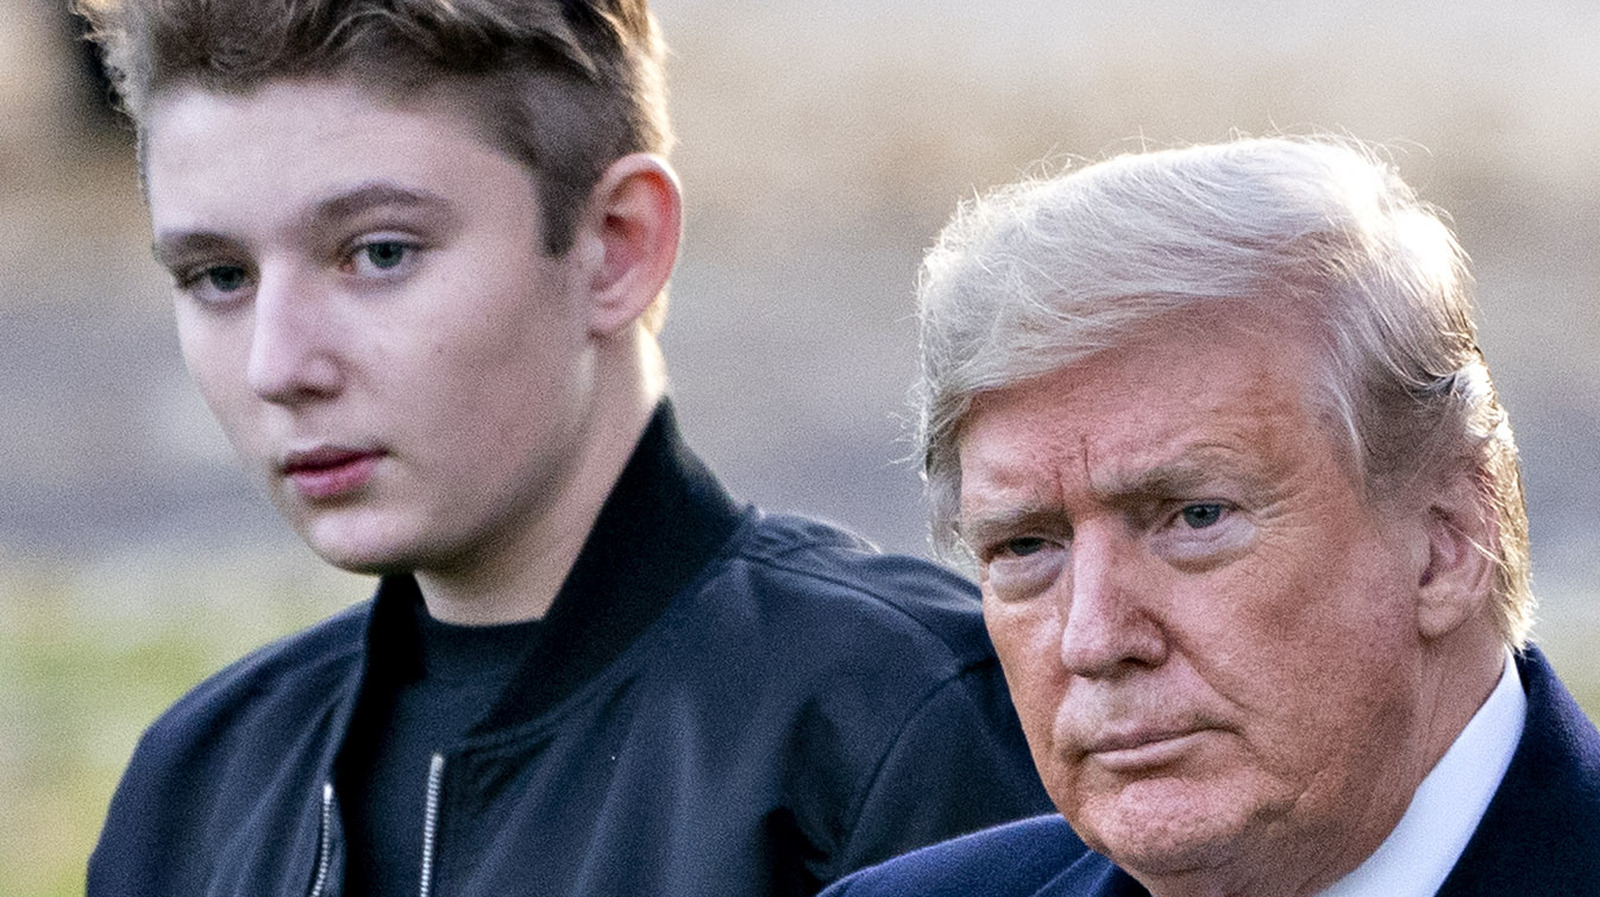 How Tall Is Barron Trump? His Height Keeps Changing